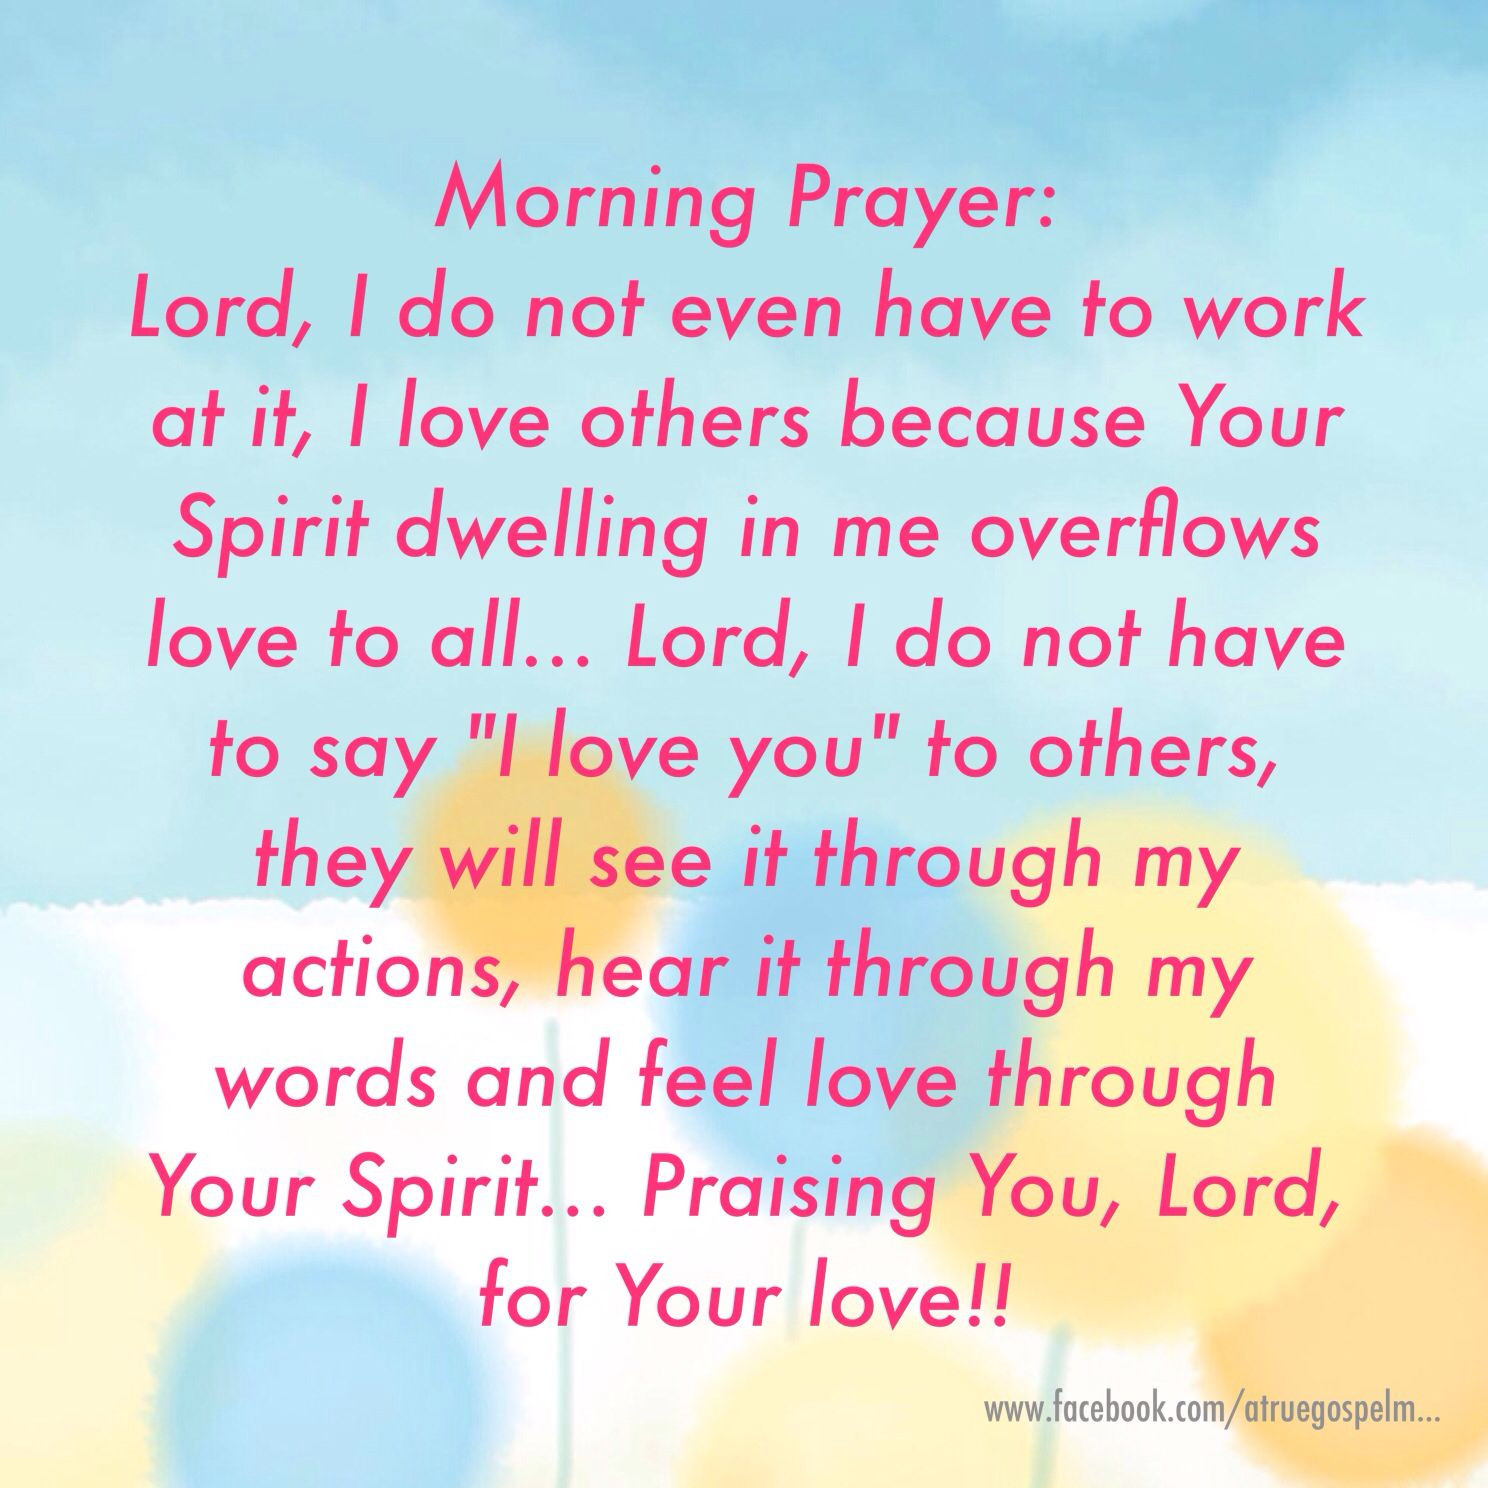 Love Prayer Quotes
 Morning Prayer Lord let my actions speak "I love you